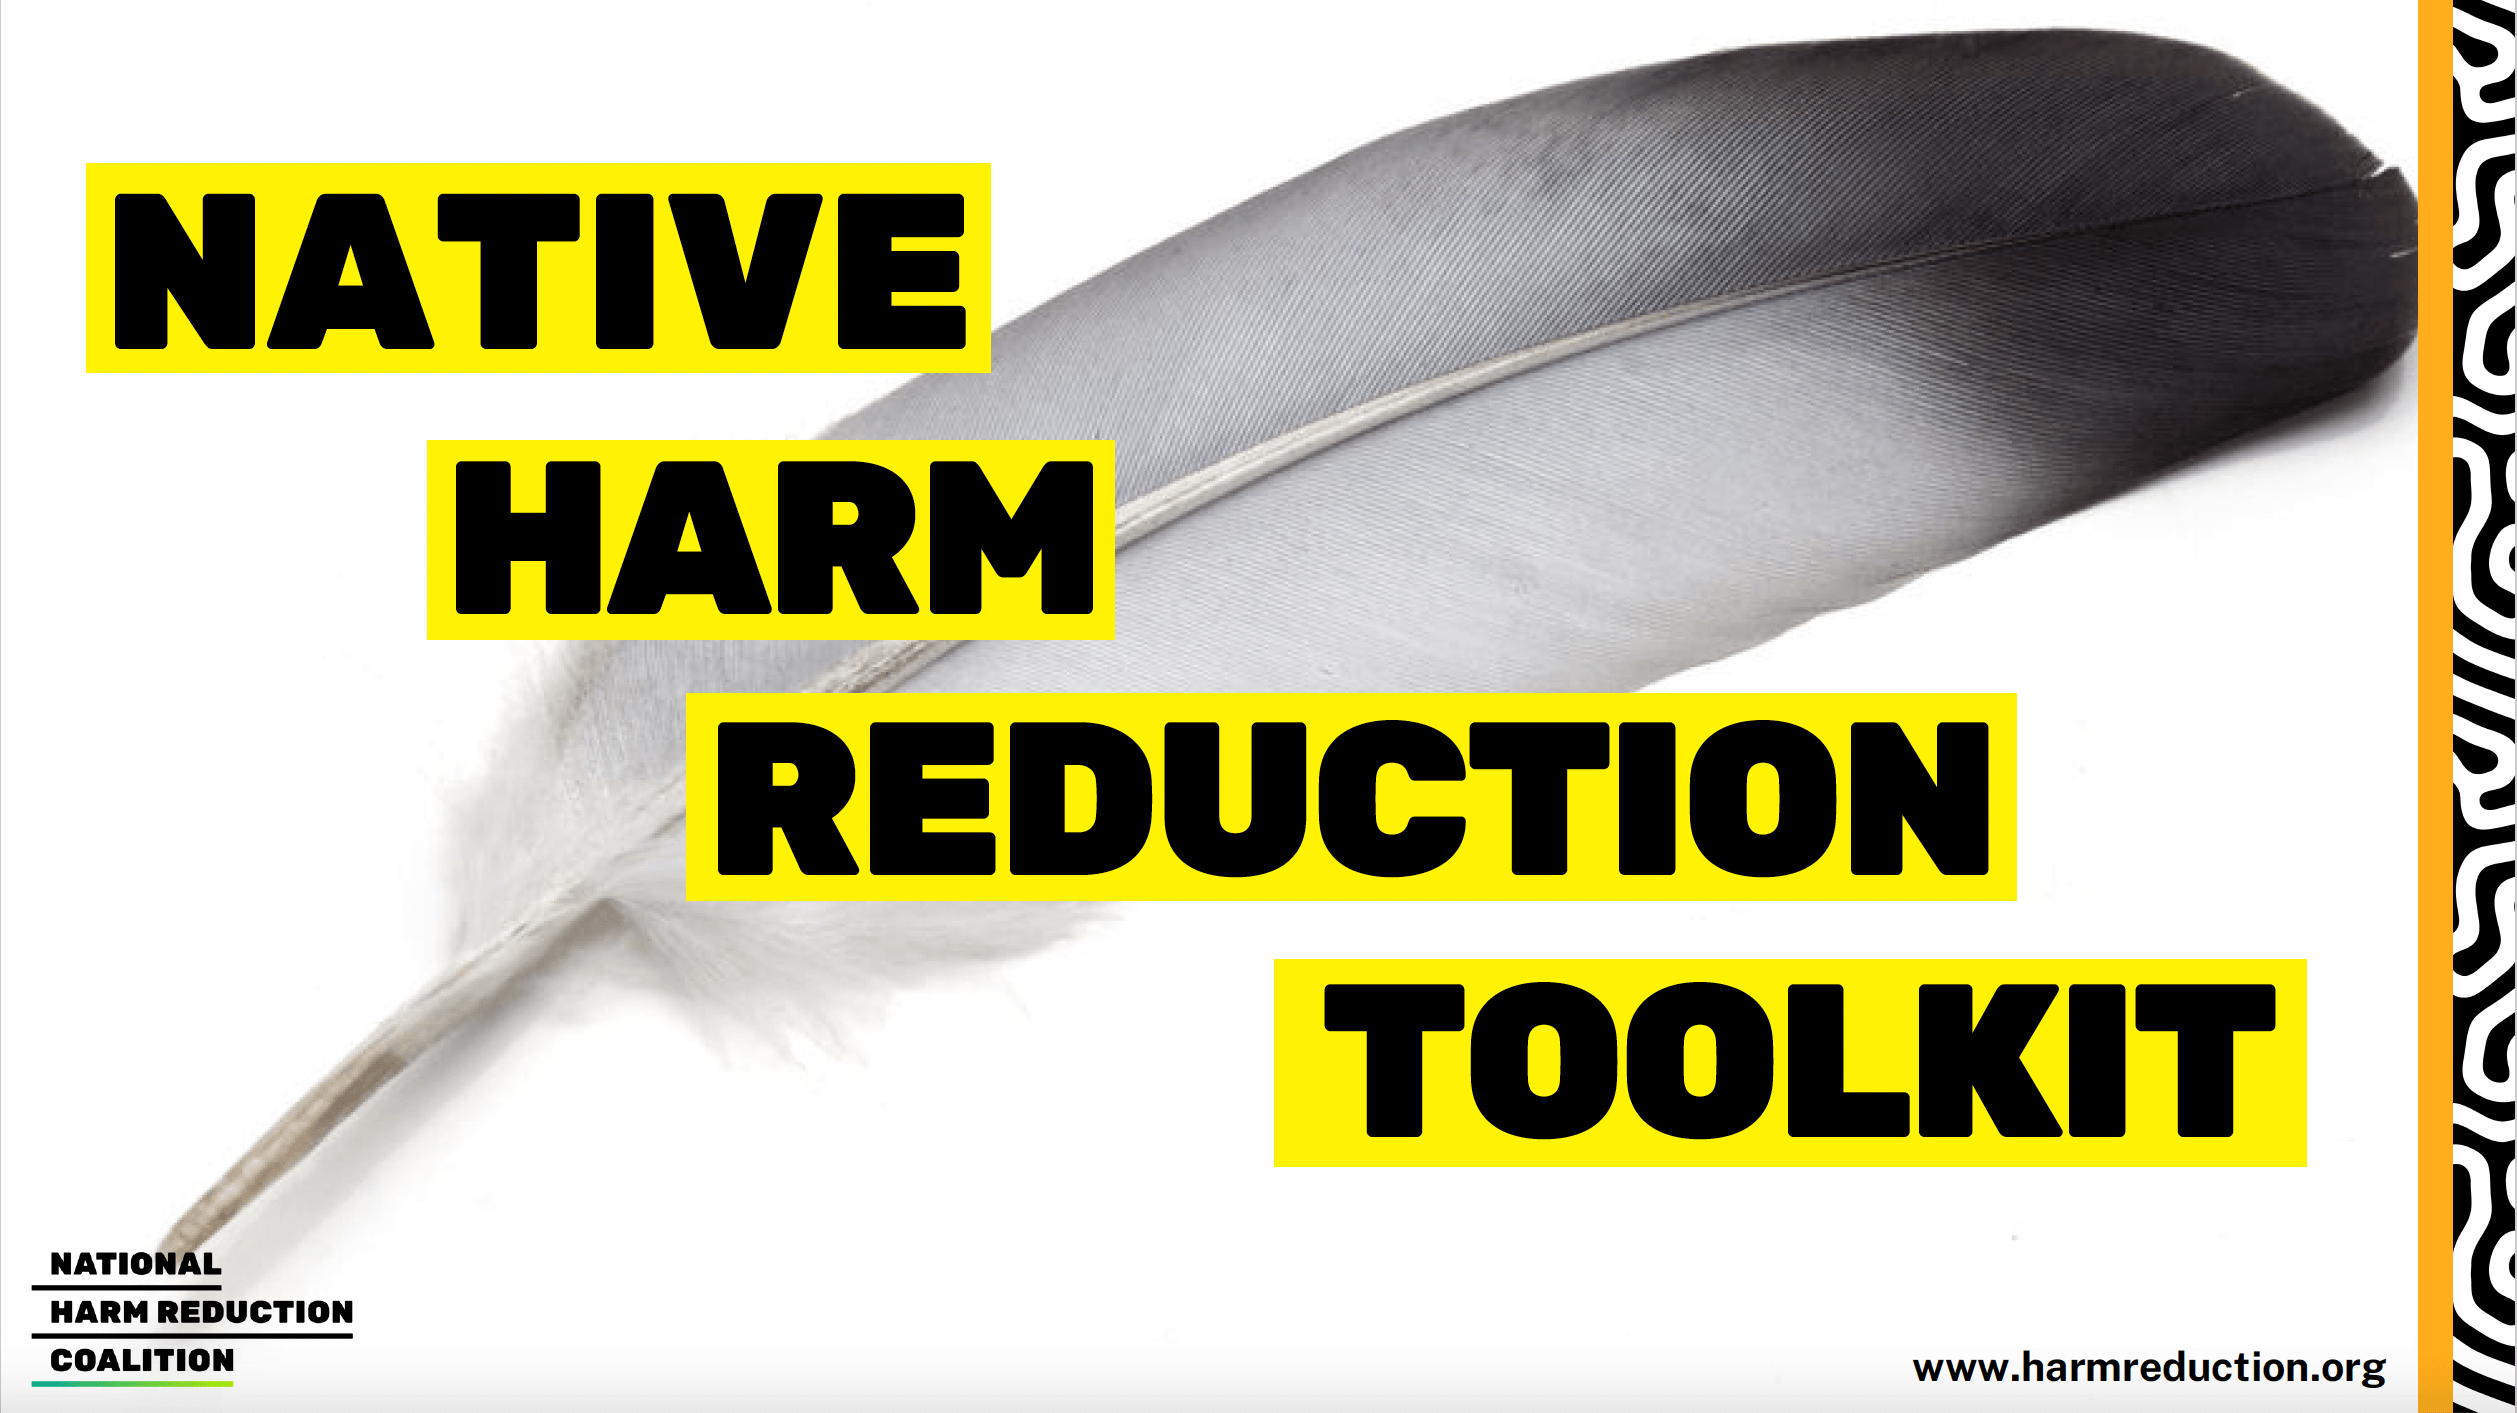 "www.harmreduction.org" at bottom right. Framing right side of graphic is yellow line border and black-and-white maze-like pattern.